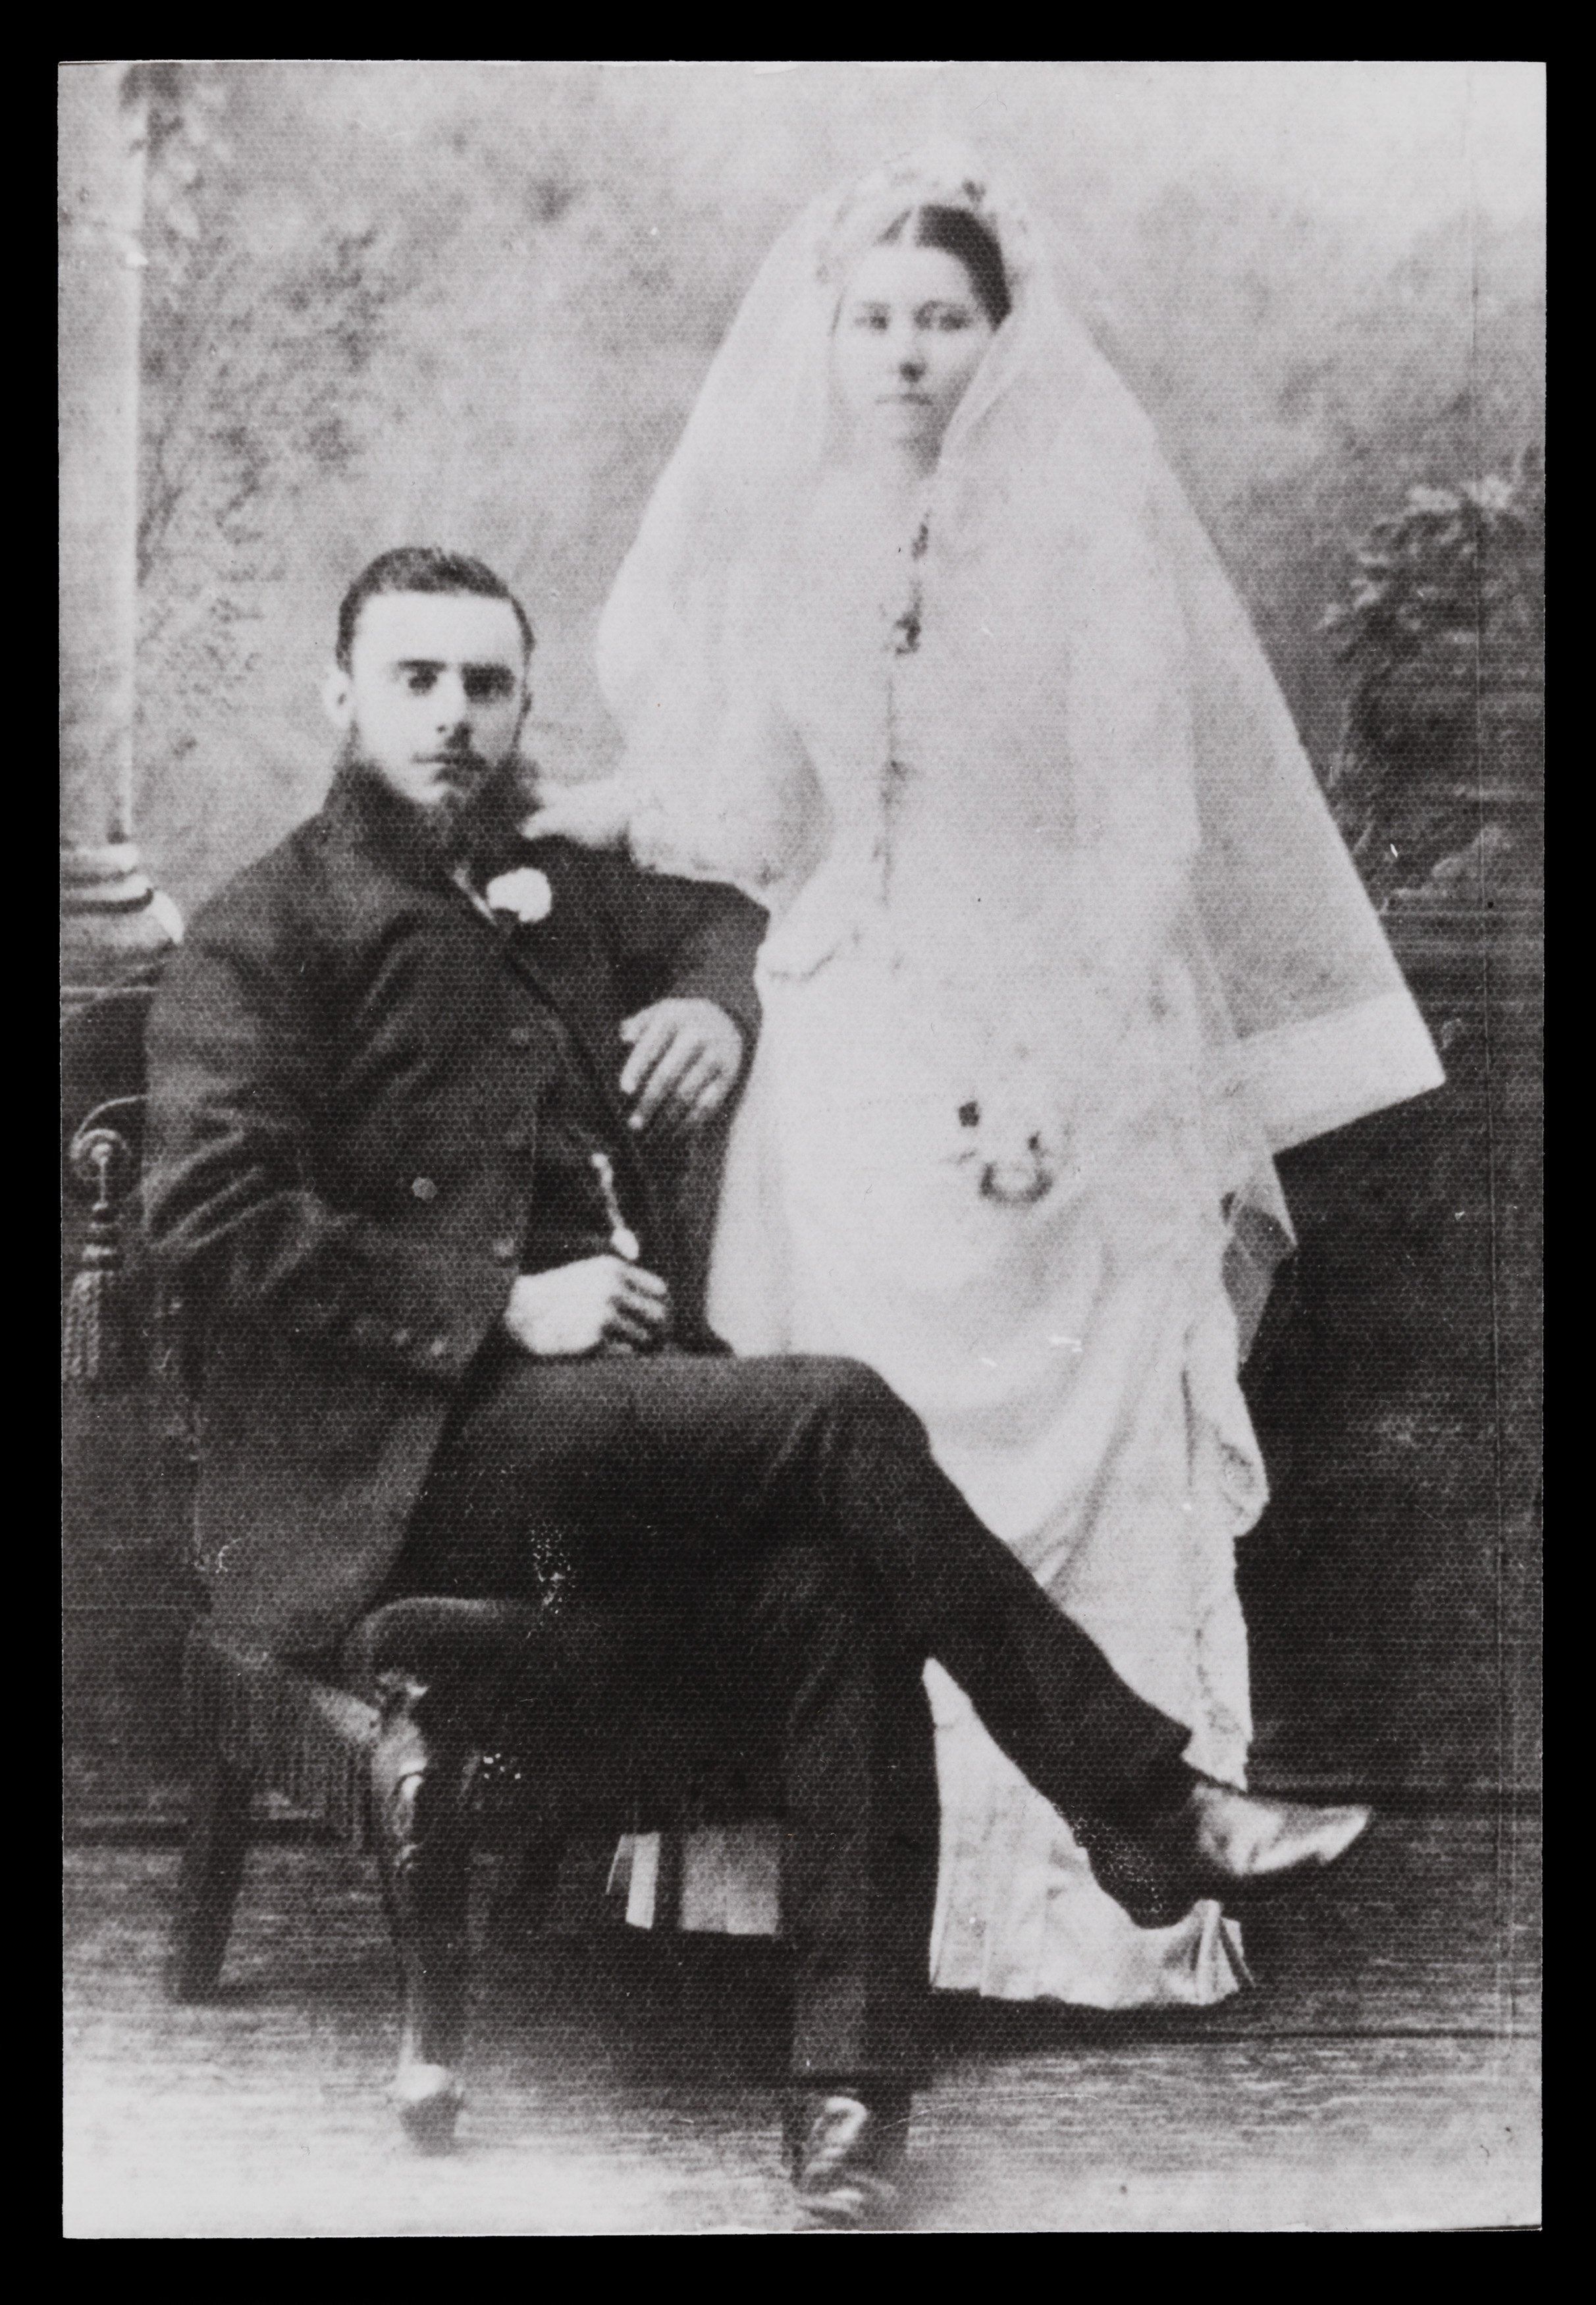 Black and white wedding photograph. The groom is wearing a suit and sitting in a chair, and beside him stands the bride in a white wedding dress and veil.